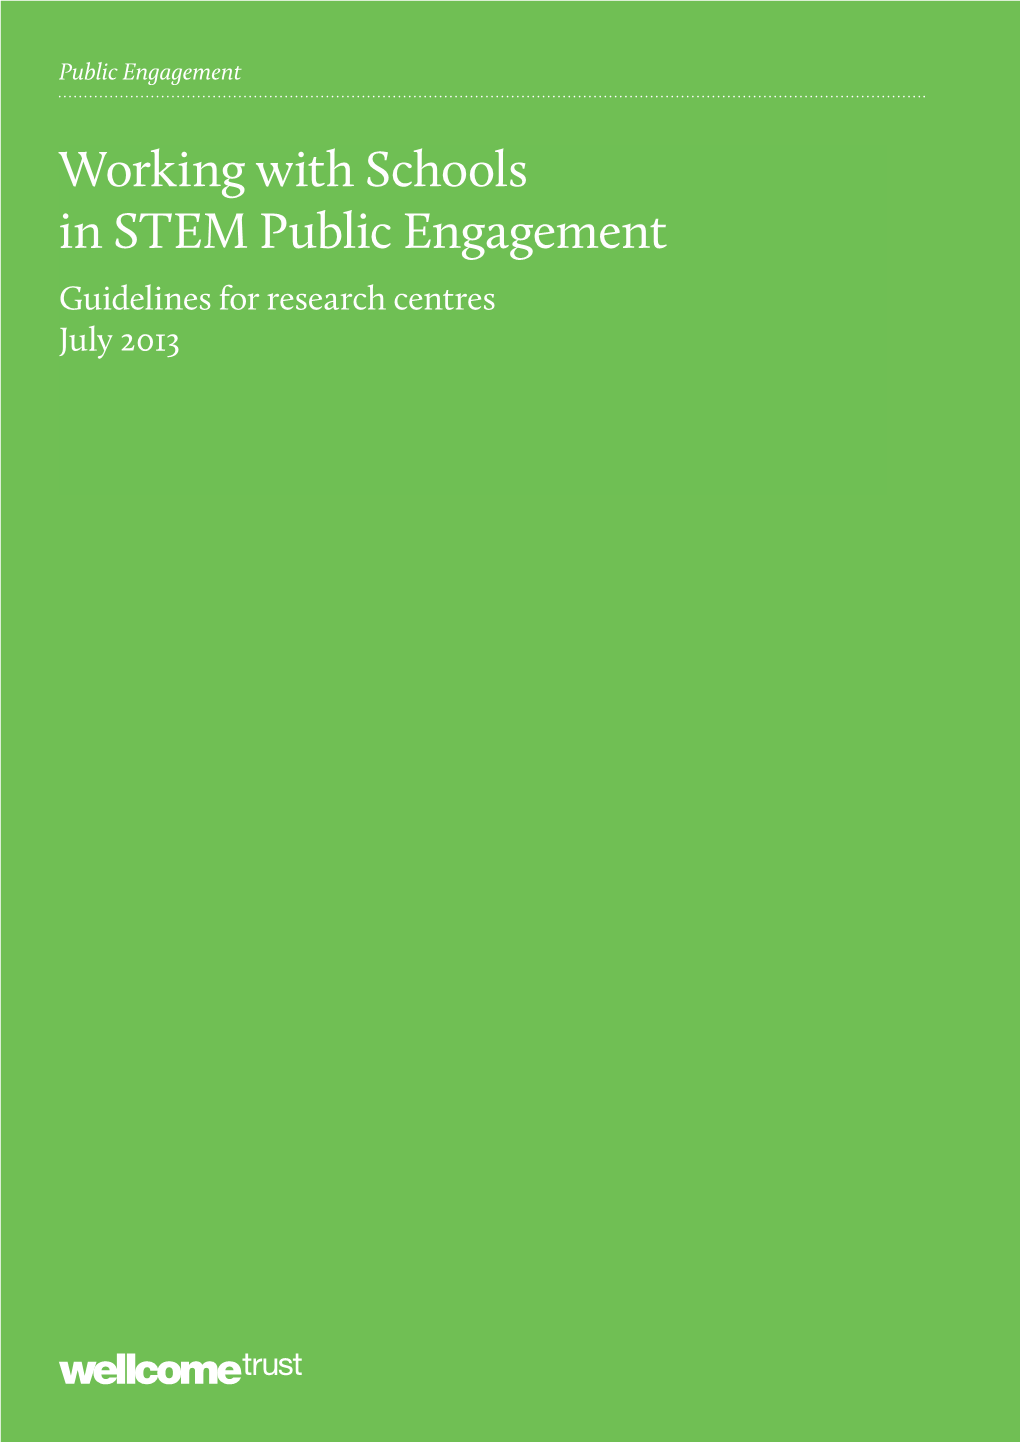 Working with Schools in STEM Public Engagement Guidelines for Research Centres July 2013